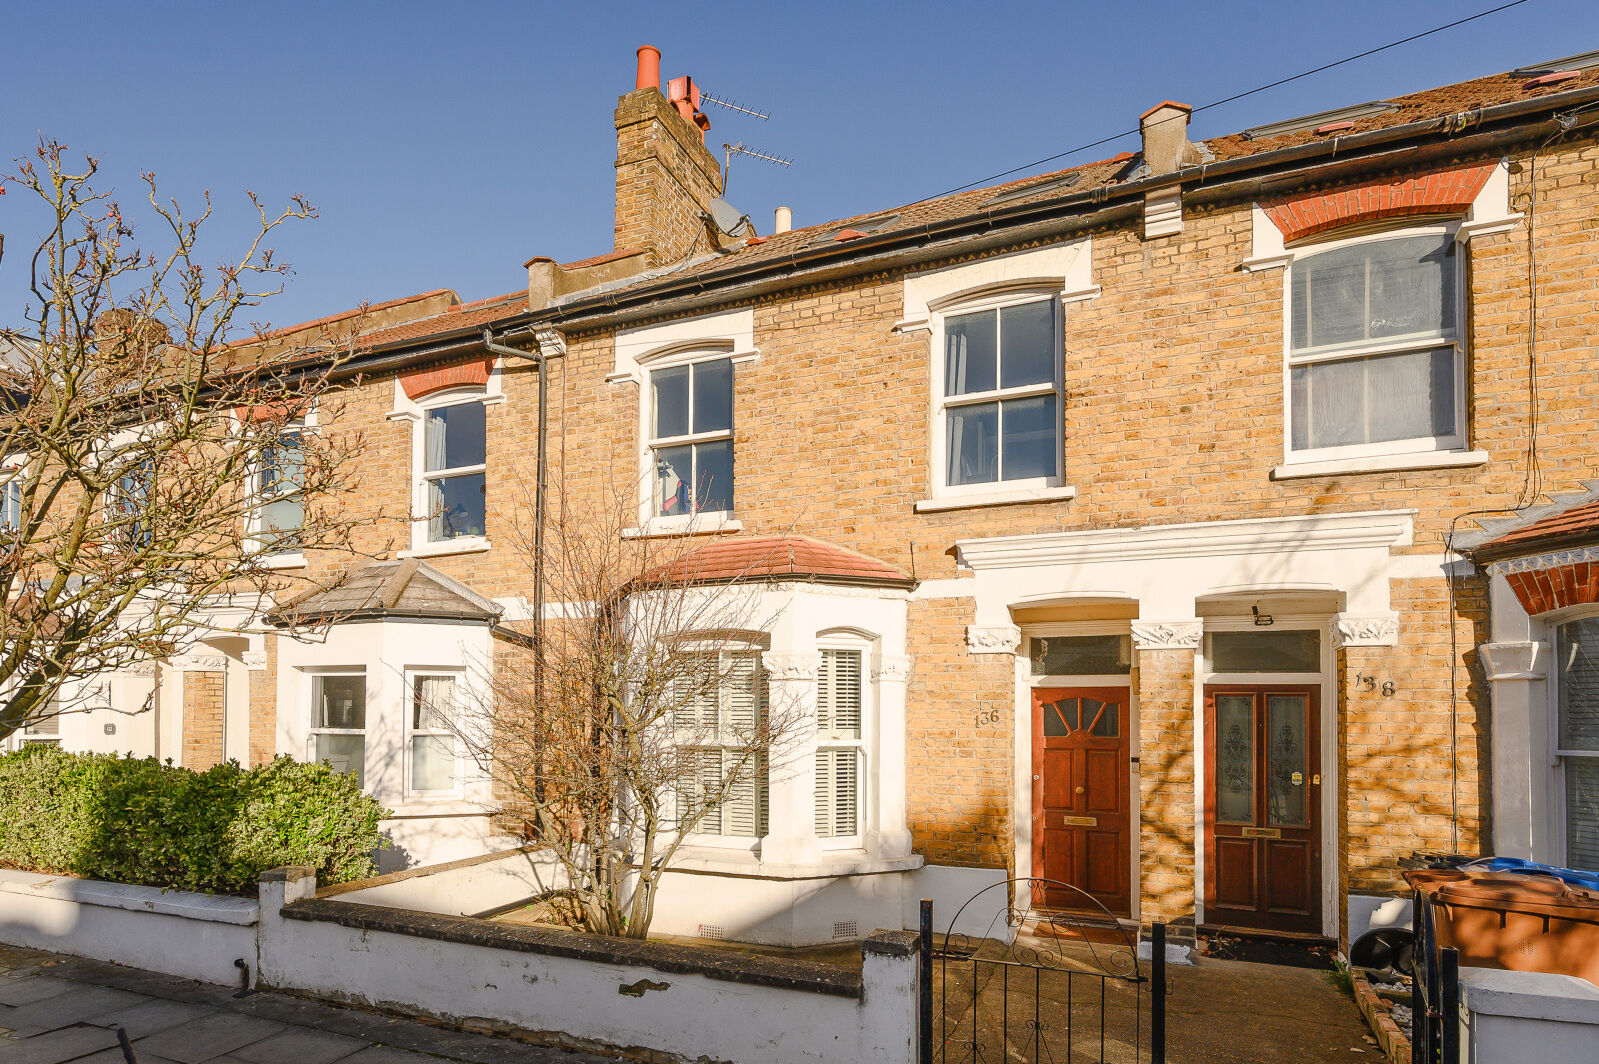 4 bedroom mid terraced house for sale Graham Road, Wimbledon, SW19, main image